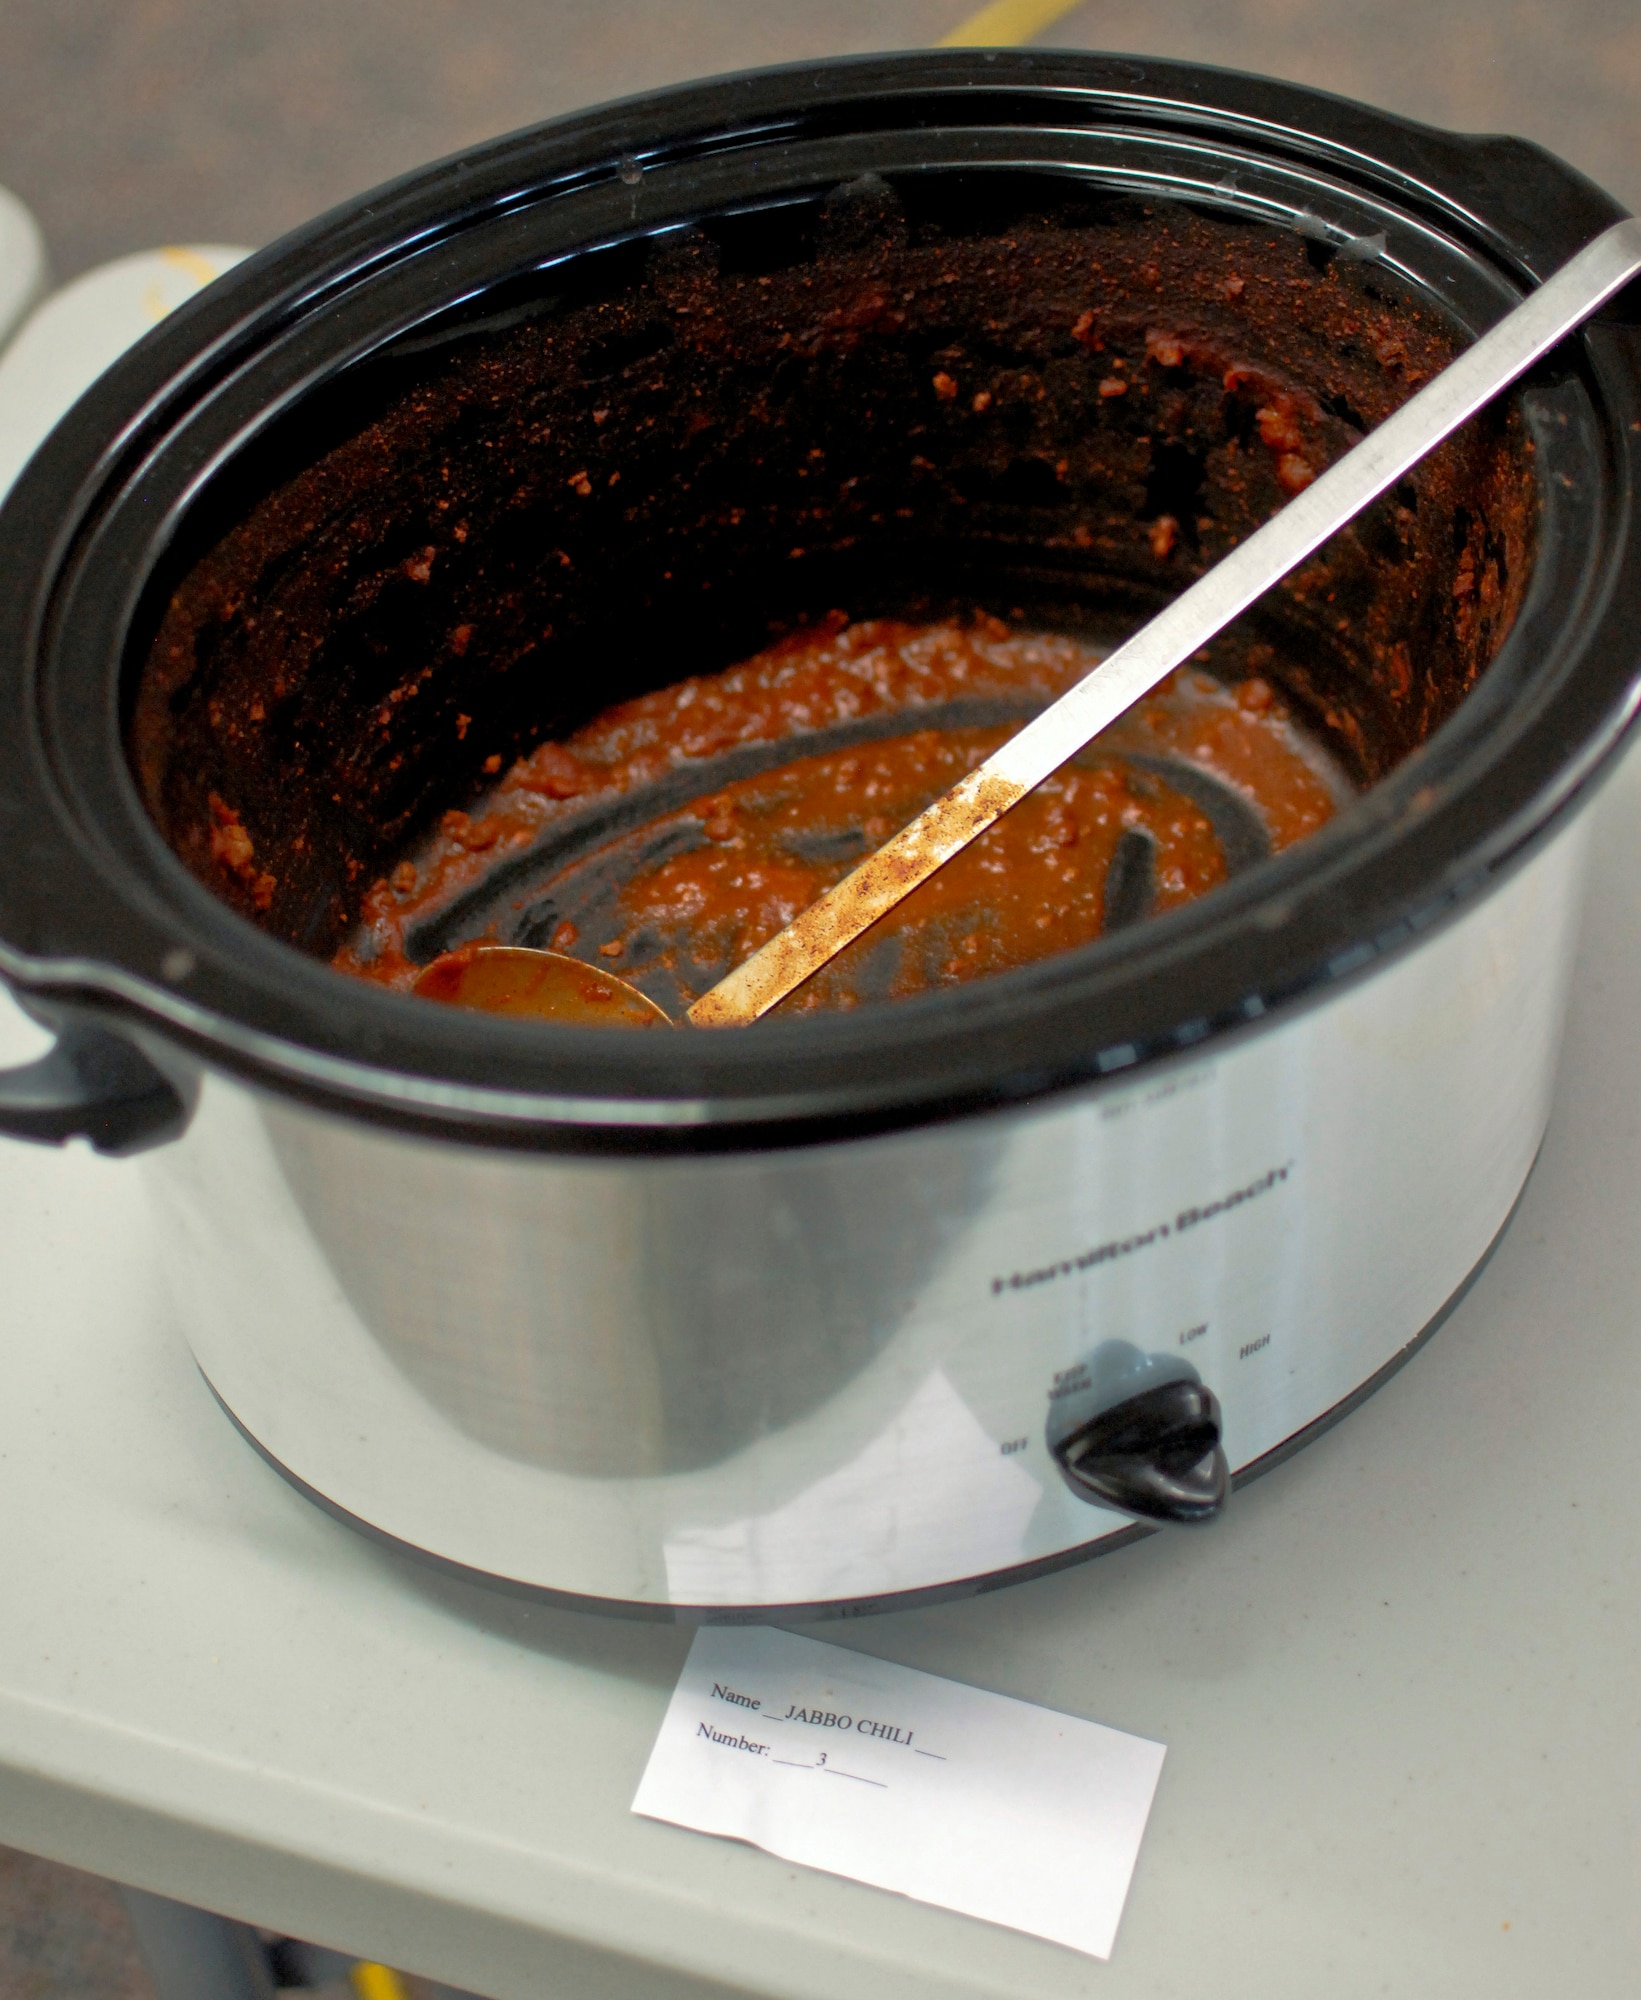 A crockpot of U.S. Air Force Tech Sgt. Alex R. Sea’s award-winning Jabbo Chili sits empty after the sixth-annual chili cook off at the 182nd Airlift Wing, Peoria, Ill., Jan. 8, 2014. The competition placed 13 contestants and their homemade chili recipes against each other to compete for best look and smell, best consistency, and best taste. Sea, a vehicle equipment maintenance specialist with the 182nd Logistics Readiness Squadron, won in both the best consistency and most overall points categories. He was awarded a five-year membership to the wing’s consolidated club and had his name added to the plaque of winners. The event brought out approximately 120 unit members to sample the various white and traditional red entries, and raised $490 in support of operating the wing’s consolidated club. Sea enjoys the yearly event because he gets to have good chili with good people, he said. “It’s a good way to get out and mingle and talk to the people you don’t usually see on a day-to-day basis.” (U.S. Air National Guard photo by Staff Sgt. Lealan Buehrer/Released. Image was cropped to emphasize subject.)